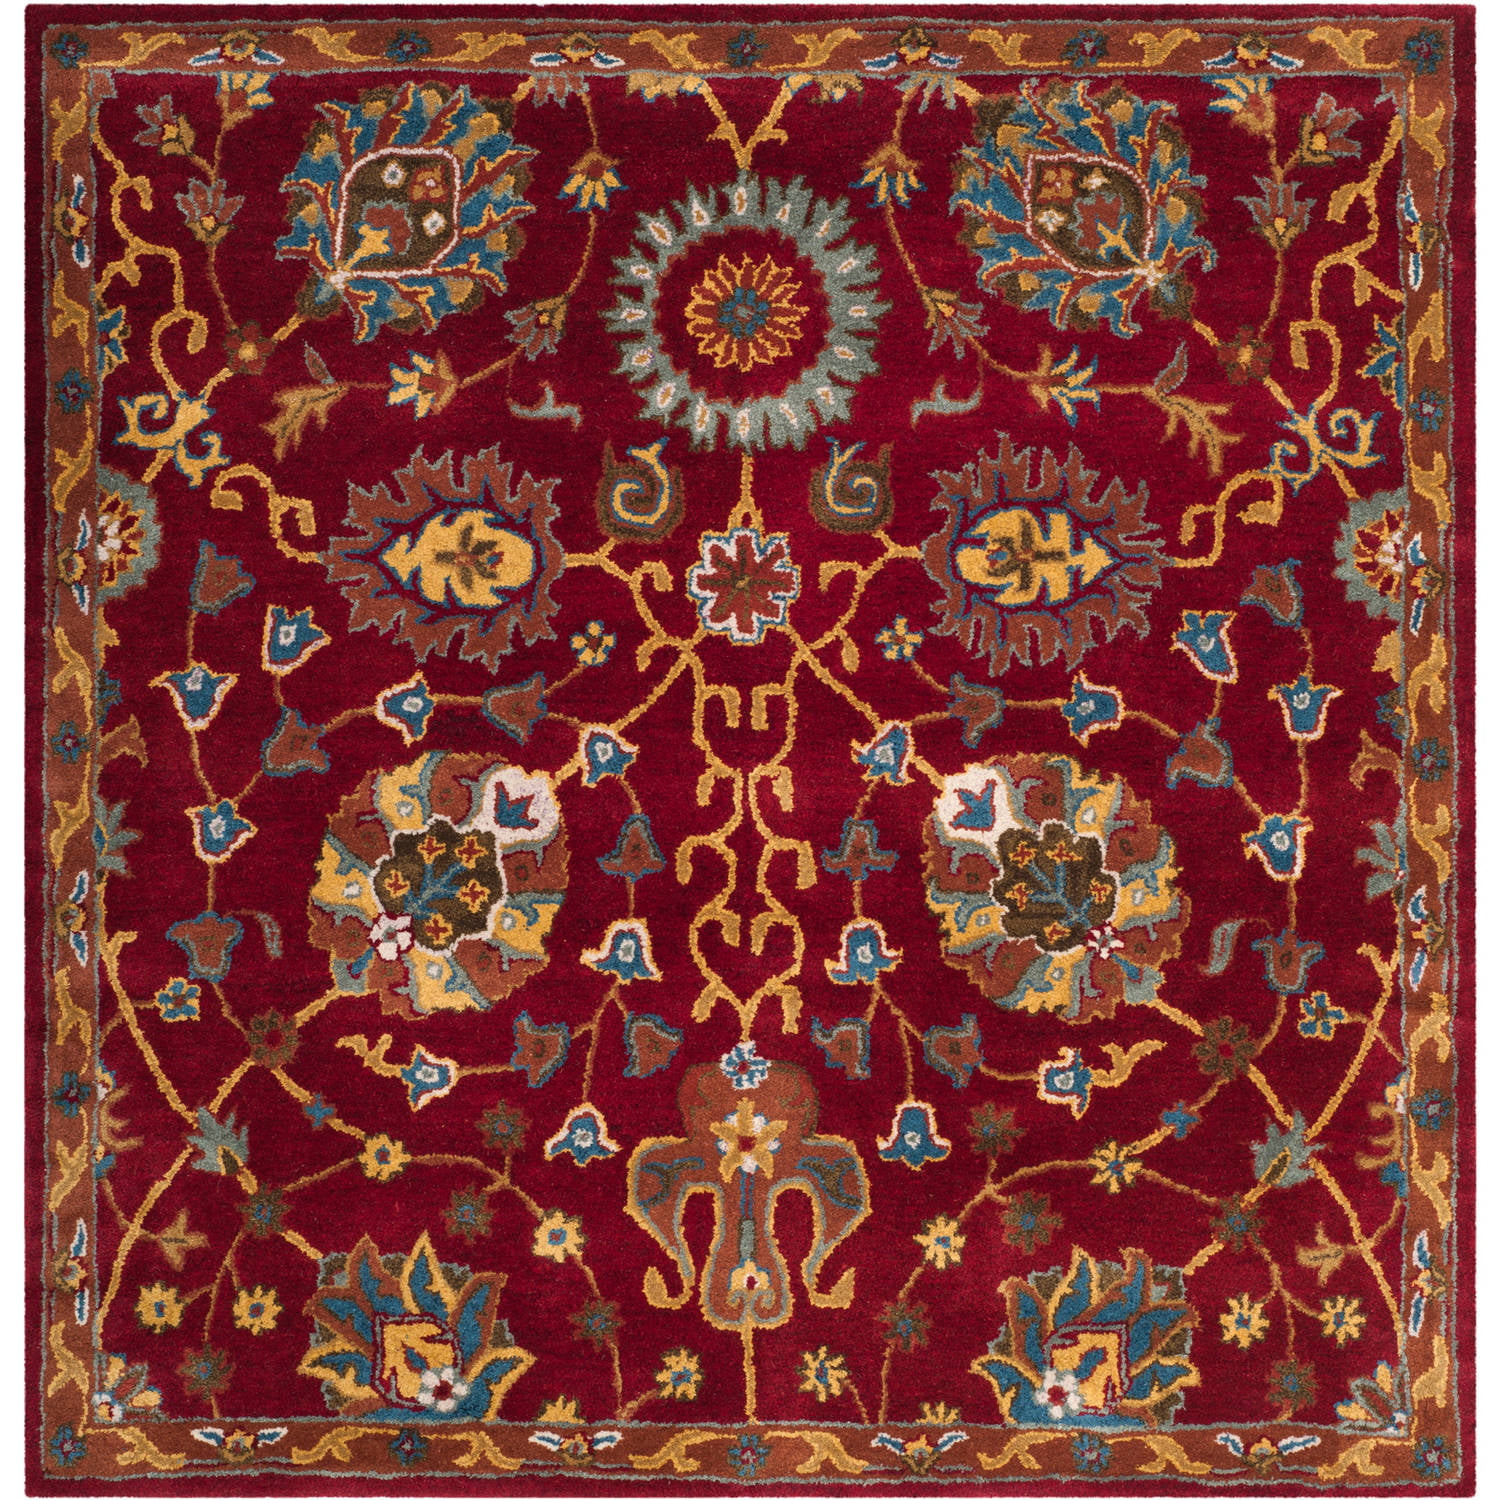 6' x 6' Round Safavieh Heritage Collection HG655A Handmade Traditional Oriental Premium Wool Area Rug Red